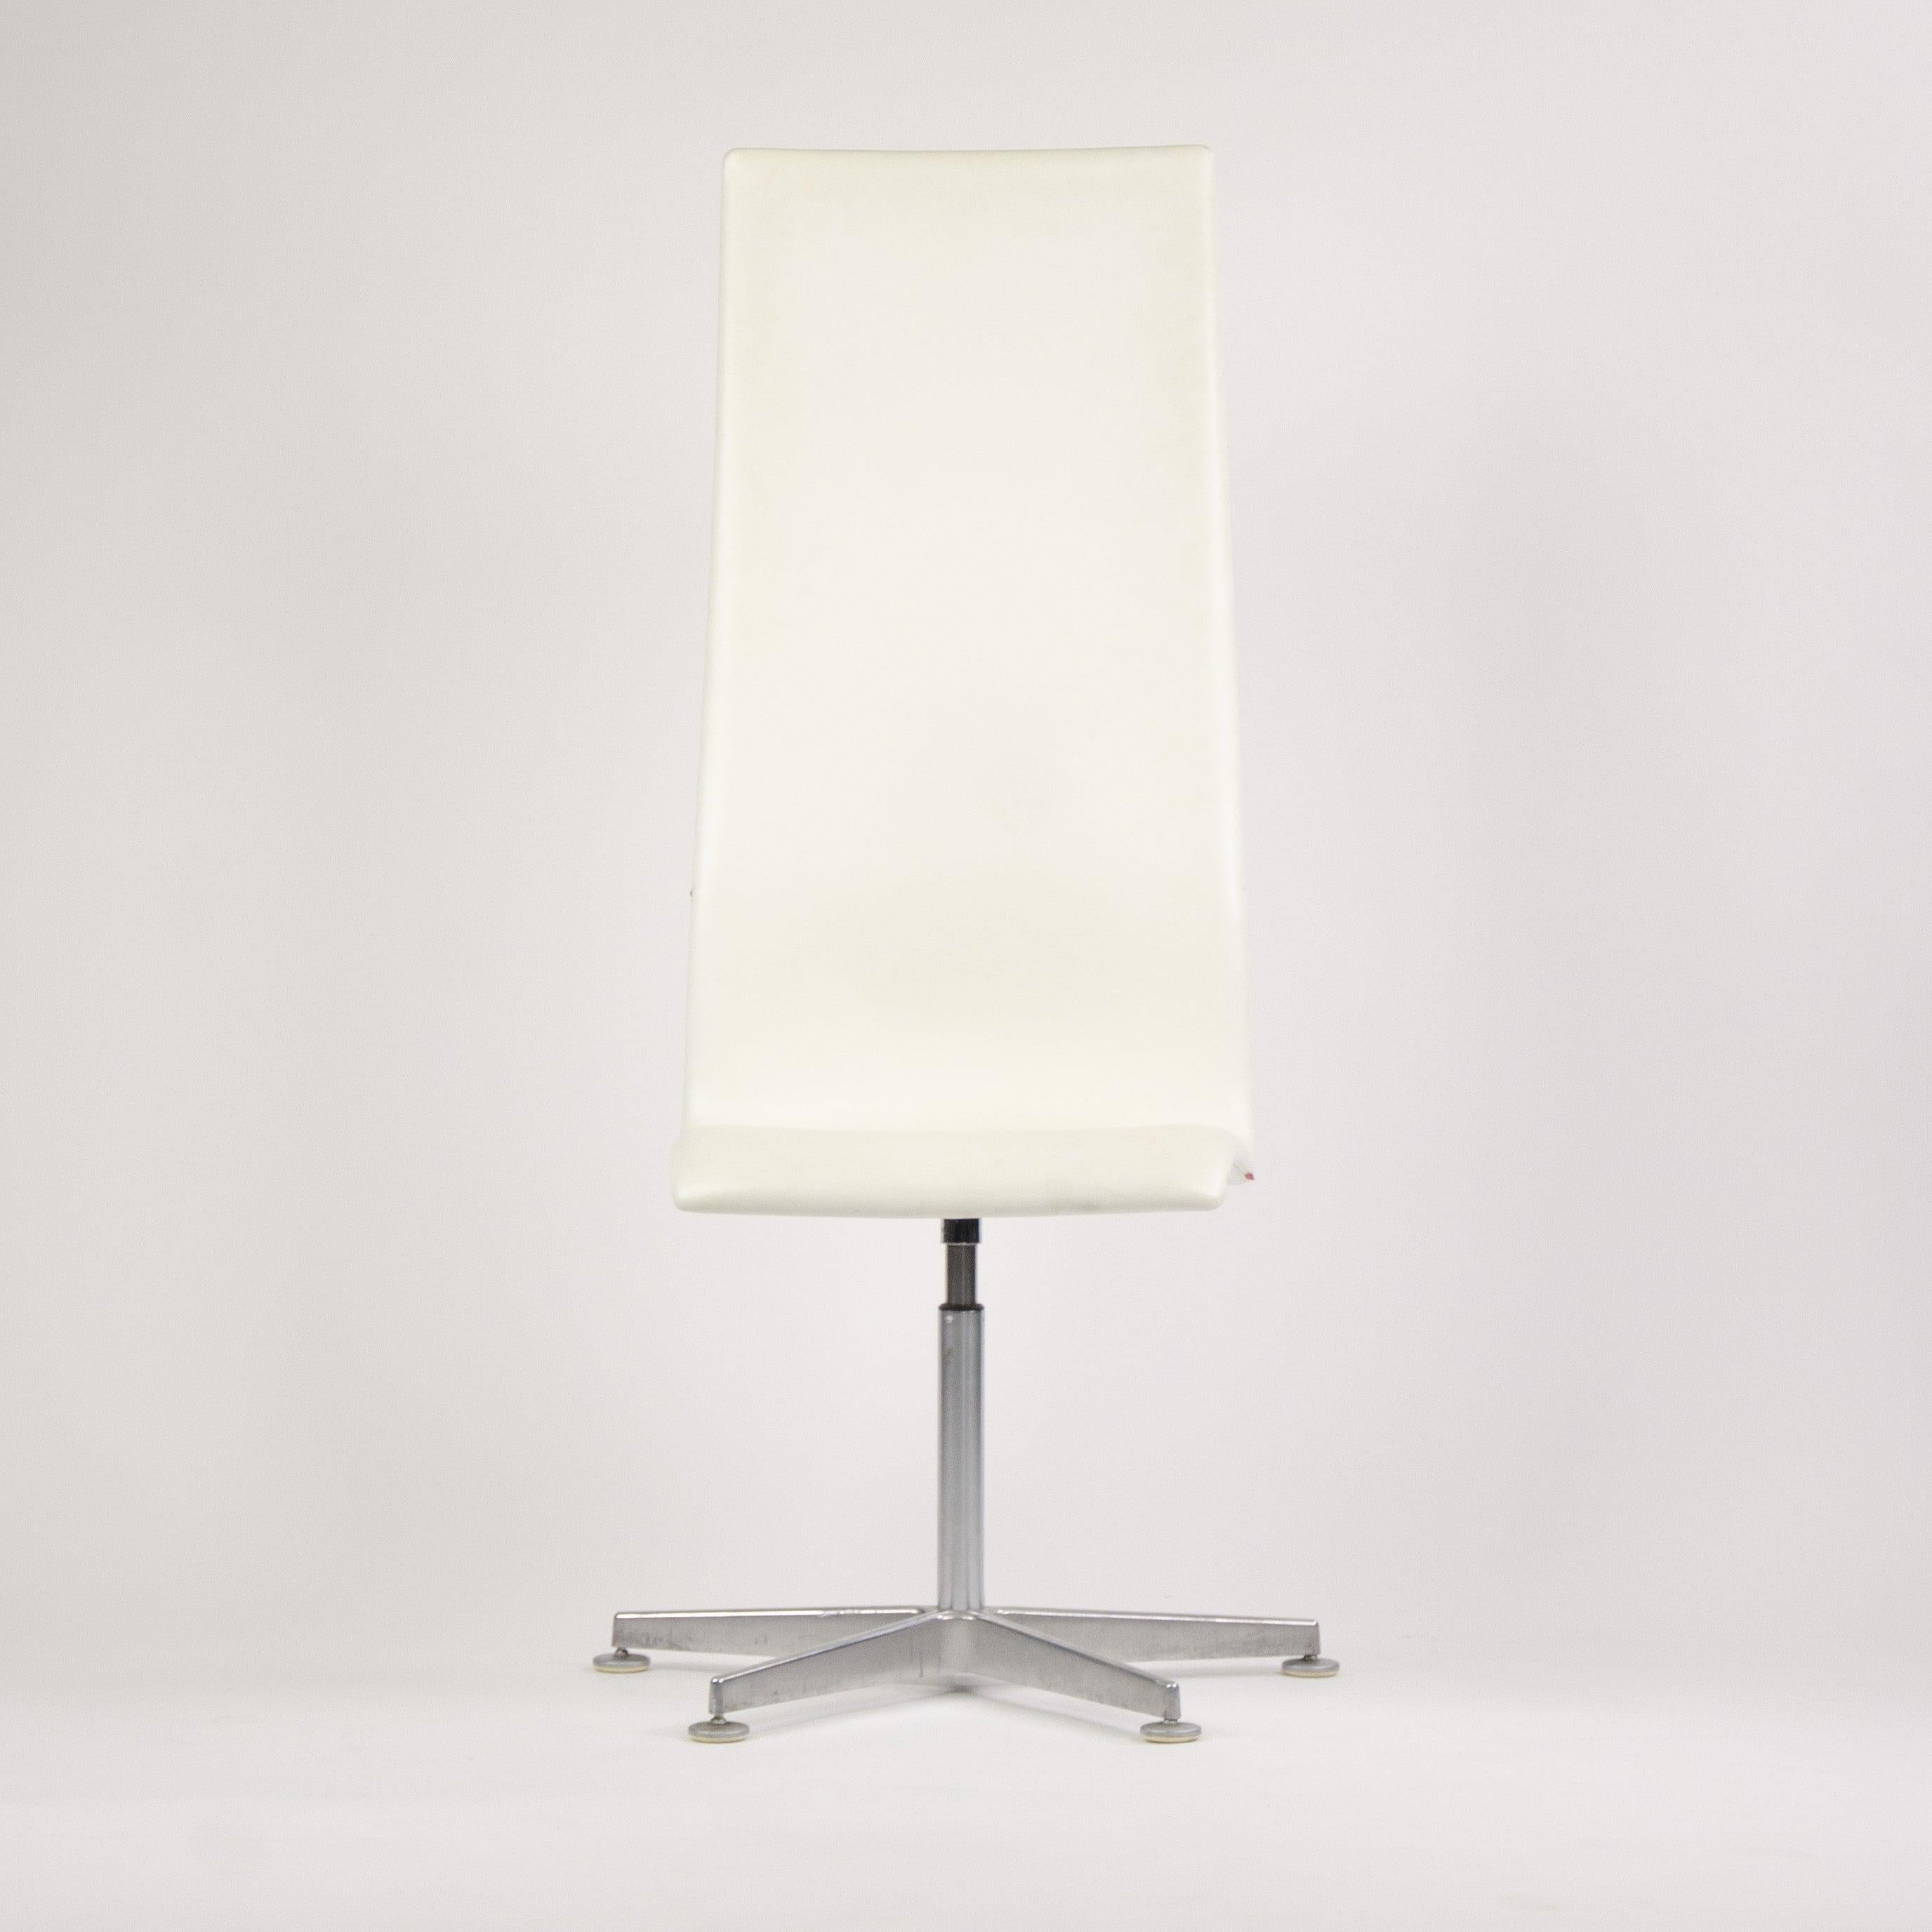 Listed for sale is an authentic (sold individually) labelled Arne Jacobsen tall oxford chair in white leather with a lovely brushed aluminum base.Four chairsare available.  

The chairs were manufactured in 2007 for a very high end high-rise in